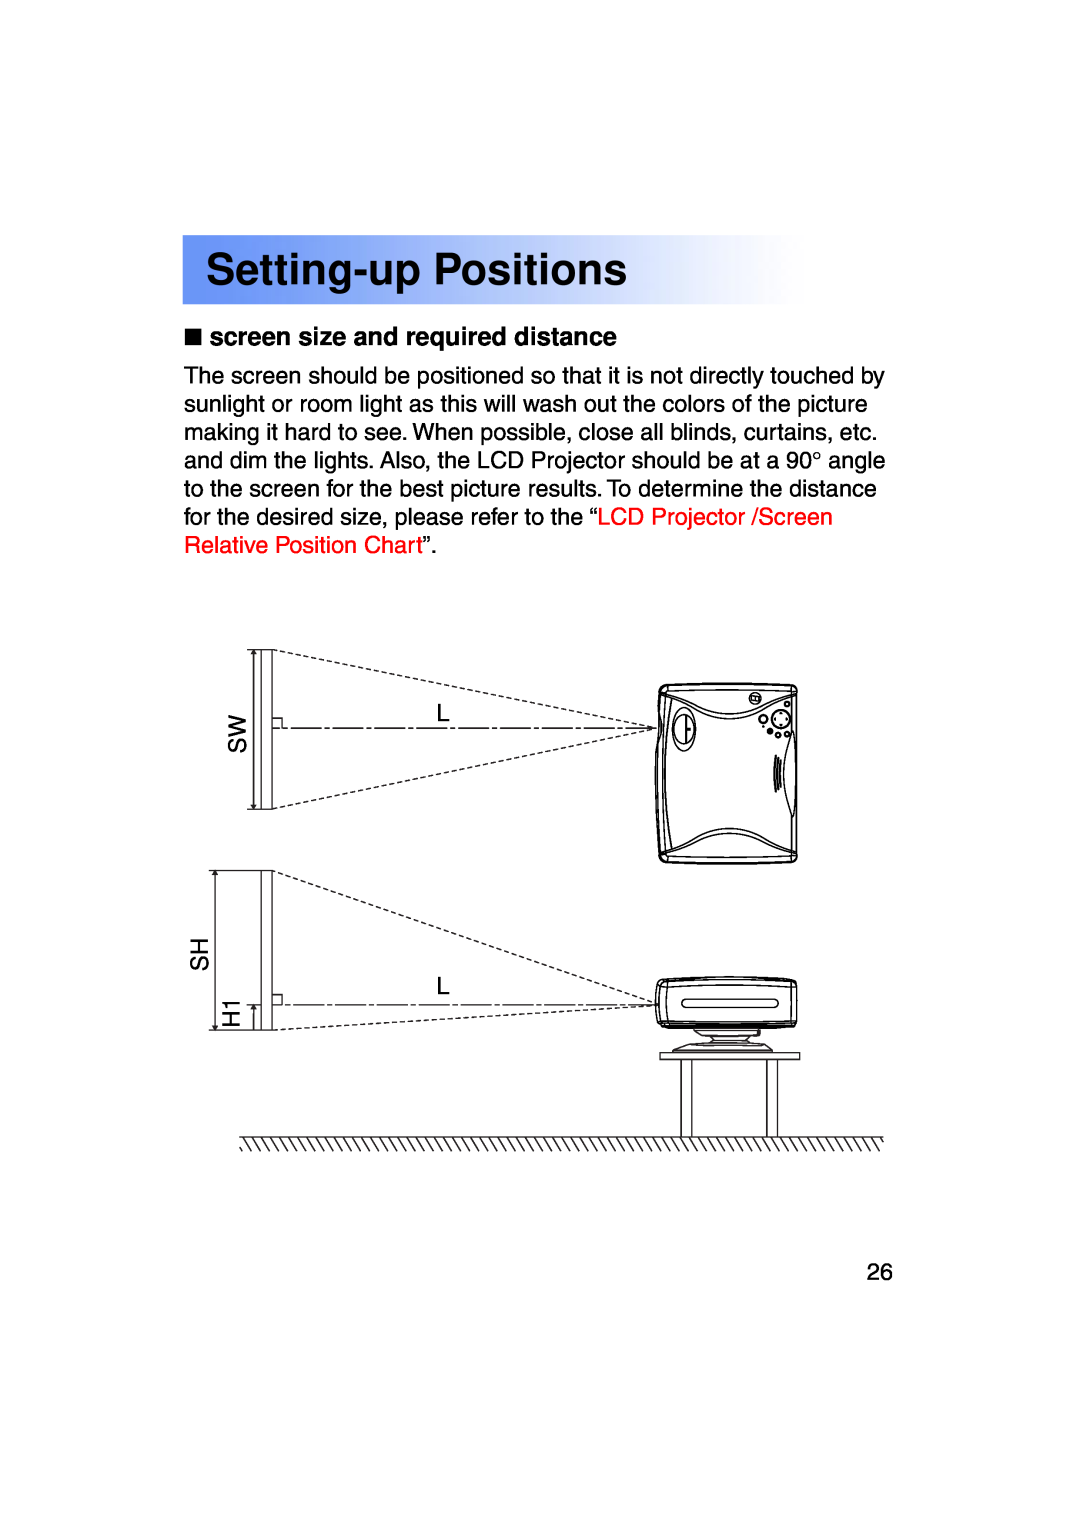 Panasonic PT-LC50U manual Setting-up Positions, screen size and required distance, SH H1 